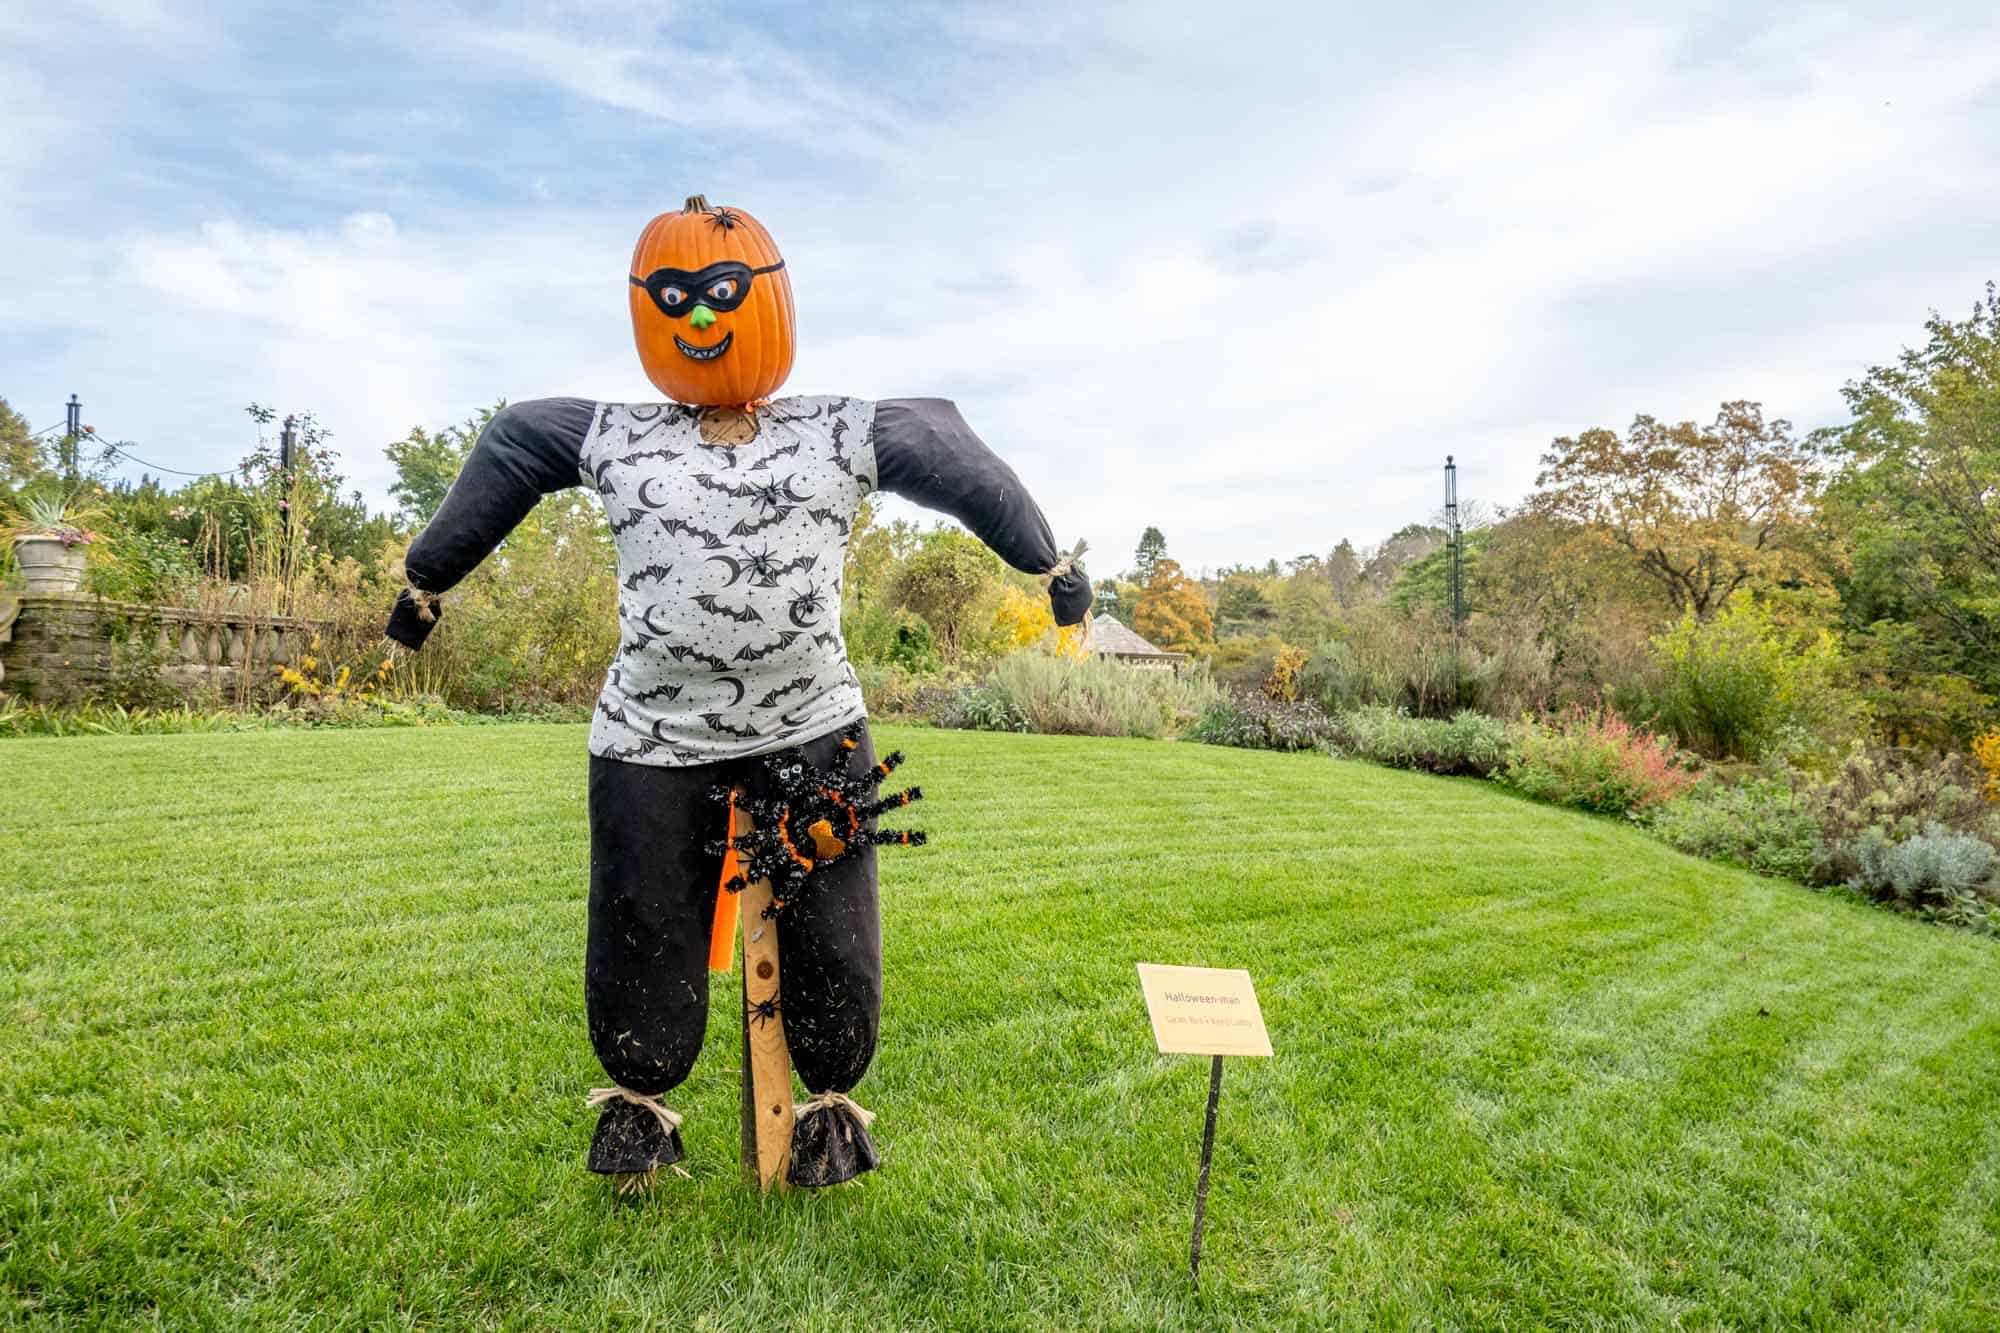 Scarecrow with a pumpkin head